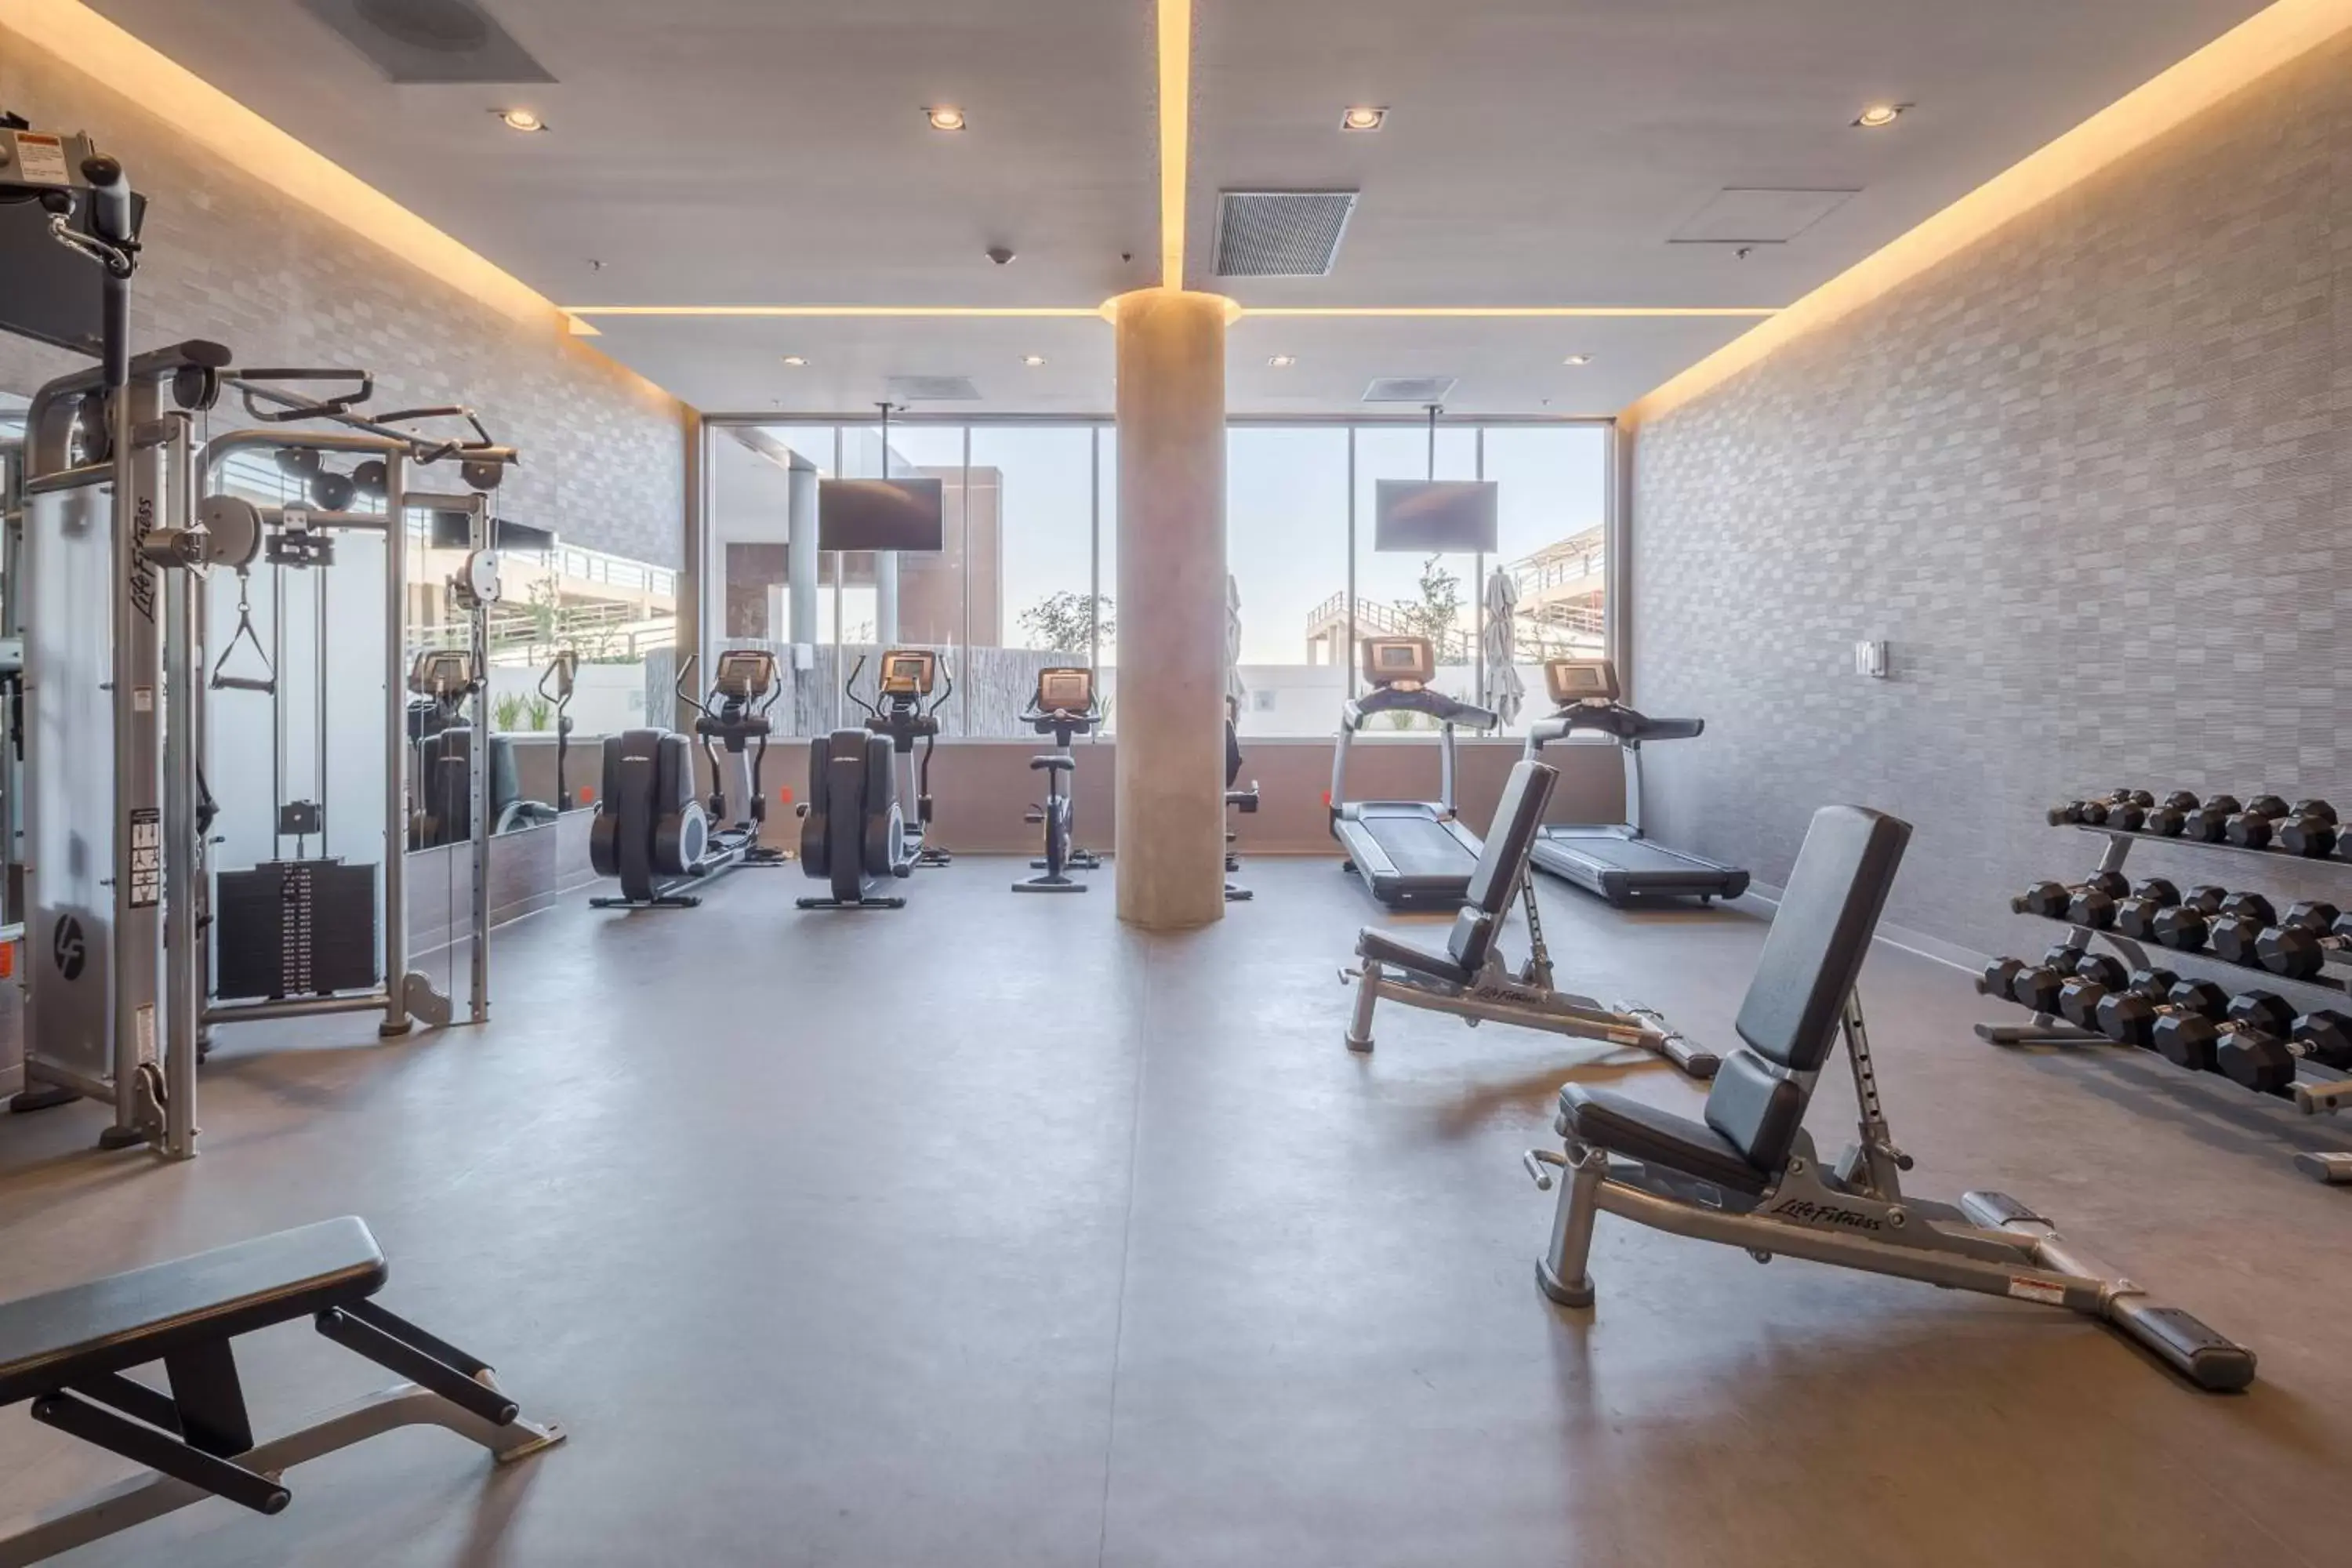 Fitness centre/facilities, Fitness Center/Facilities in Courtyard by Marriott Chihuahua